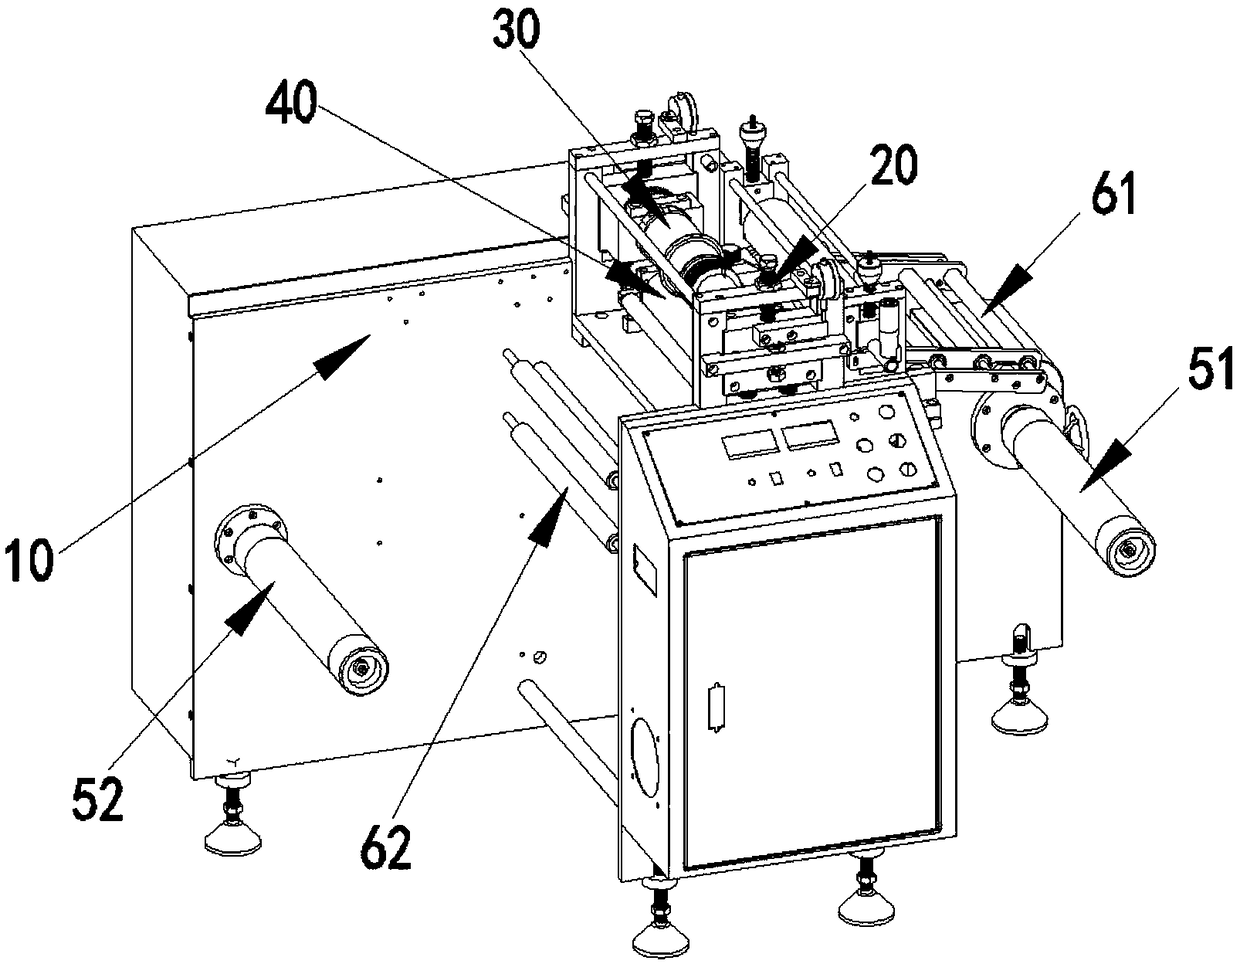 Shredding device and process for heated non-burning reconstituted tobacco